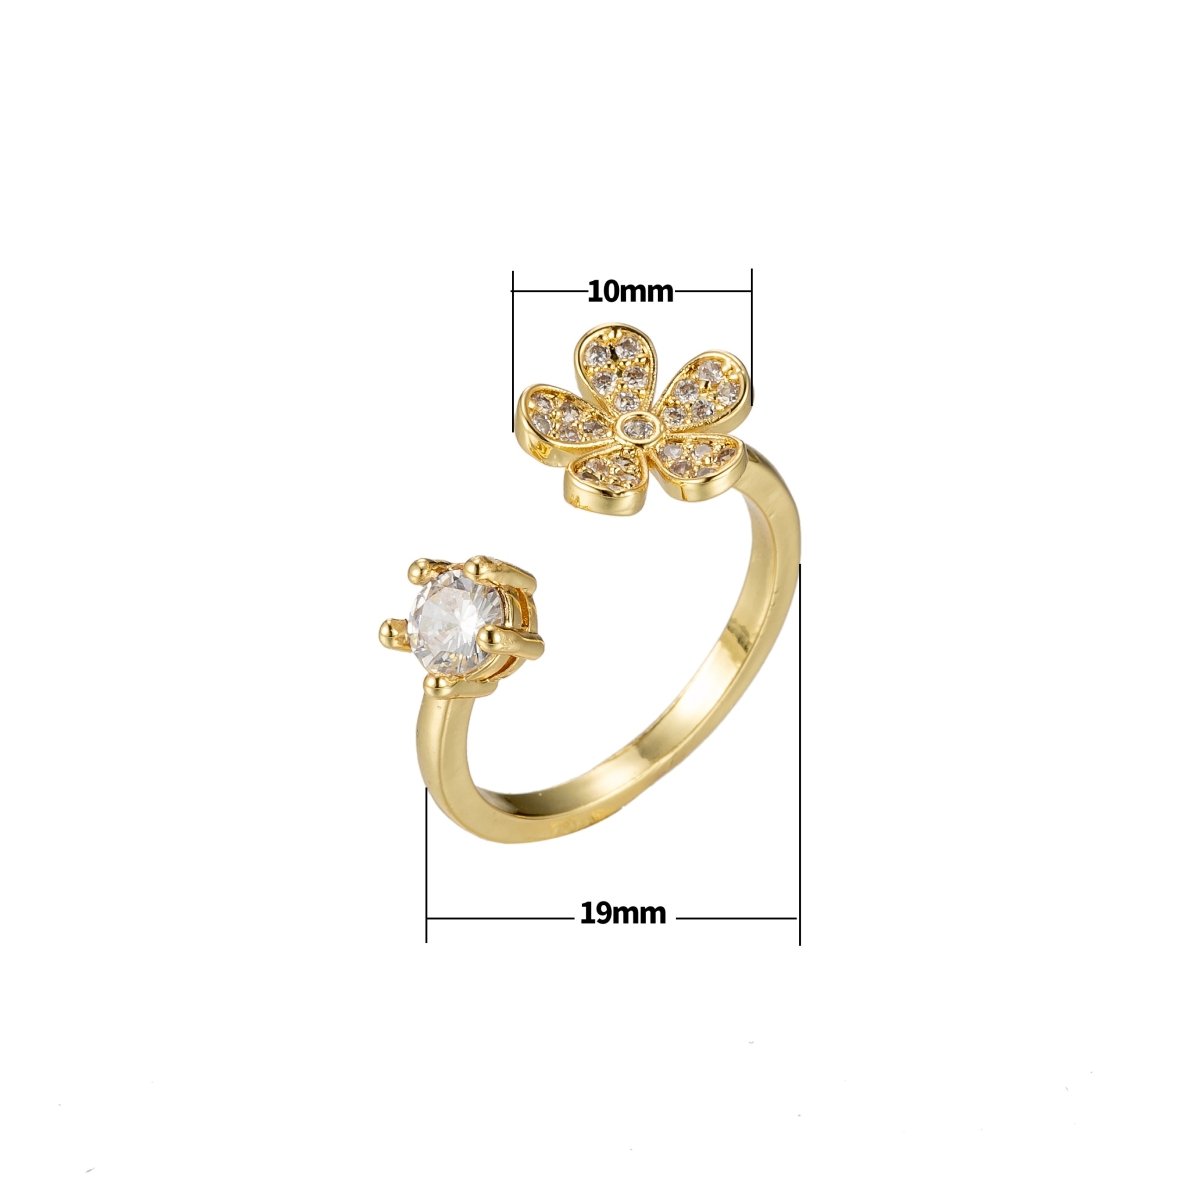 Daisy Floral Adjustable Ring Gold Daisy Ring Flower Ring Adjustable Ring Gold Color Ring for stackable Jewelry US Size 7 O-356 - DLUXCA